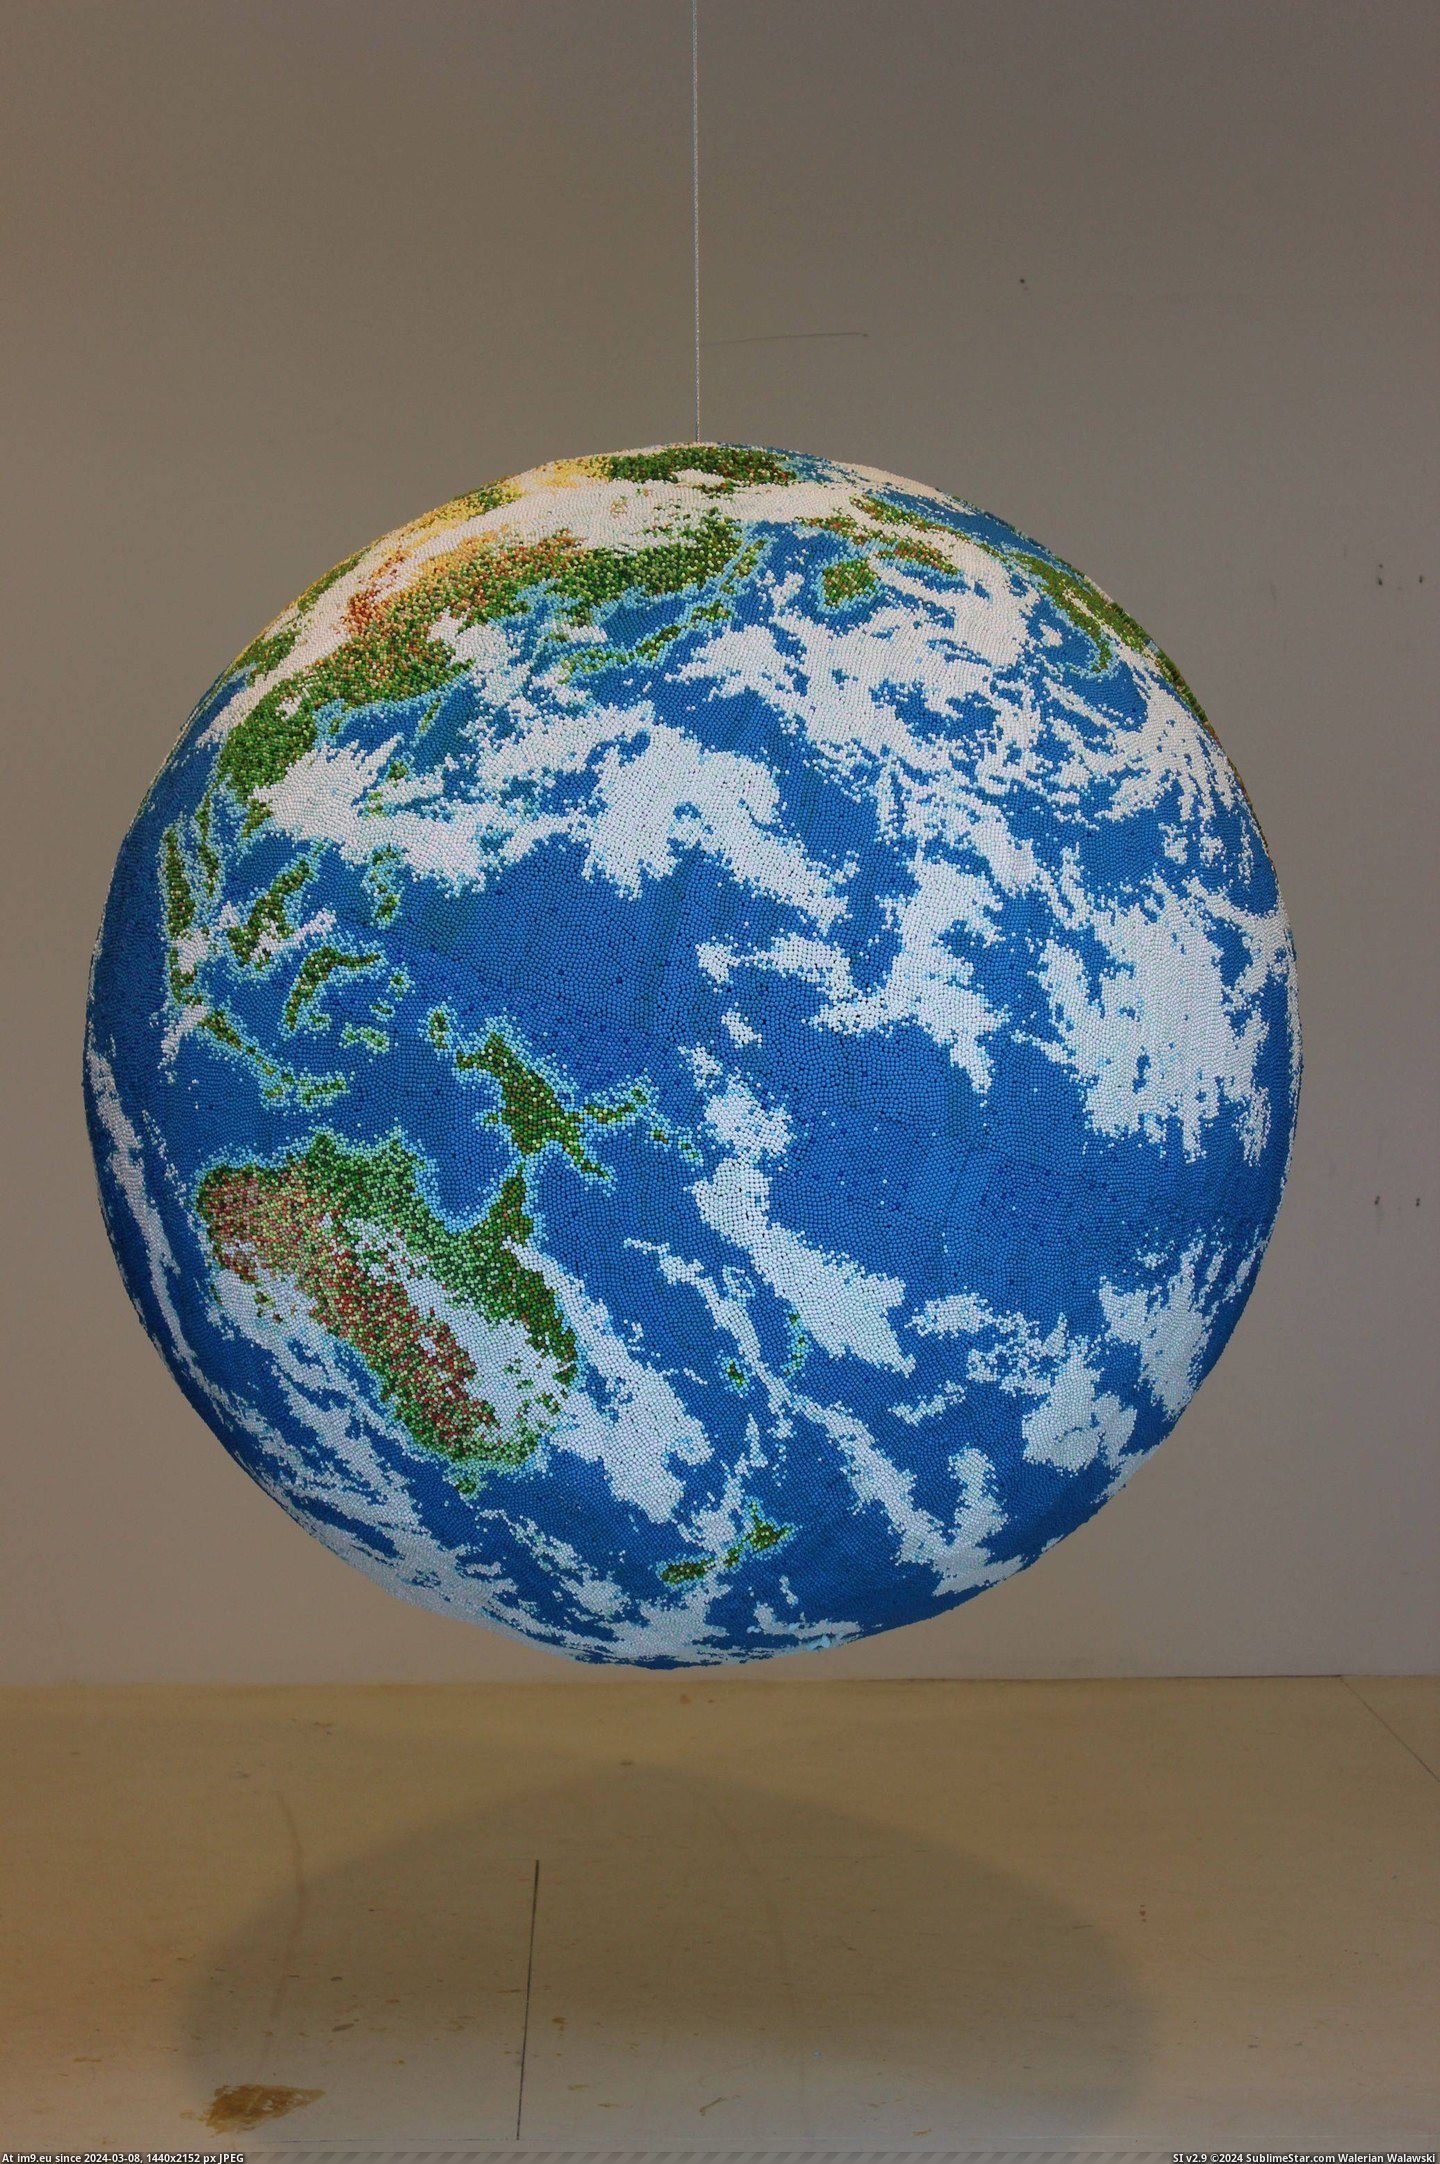 #Years #Making #Globe #Matches #Sculptor #Dad #Spent [Pics] My dad is a sculptor and has spent 2 years making this globe made entirely out of matches. 17 Pic. (Obraz z album My r/PICS favs))